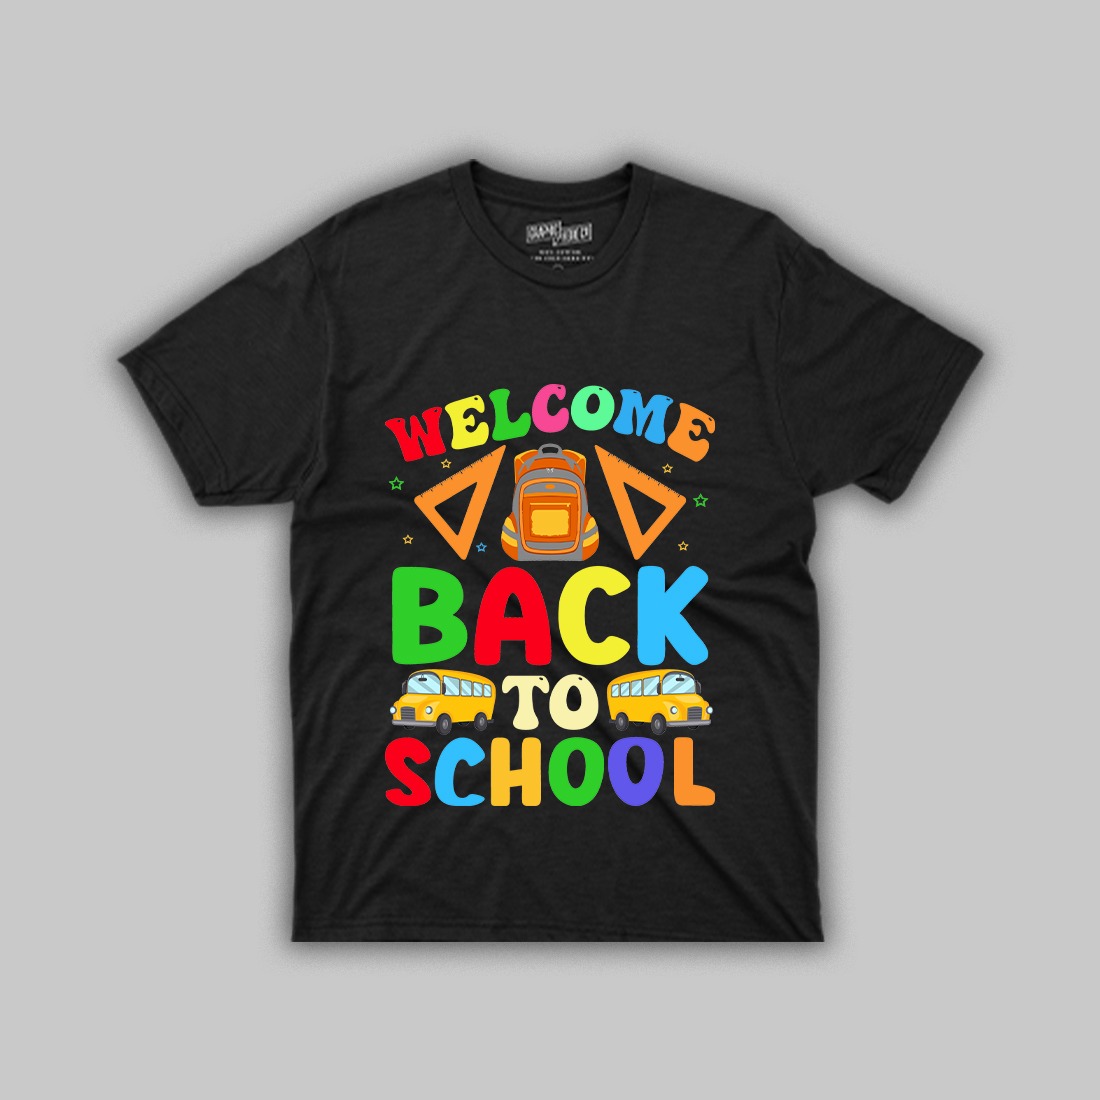 Image of a T-shirt with an exquisite slogan Welcome Back To School